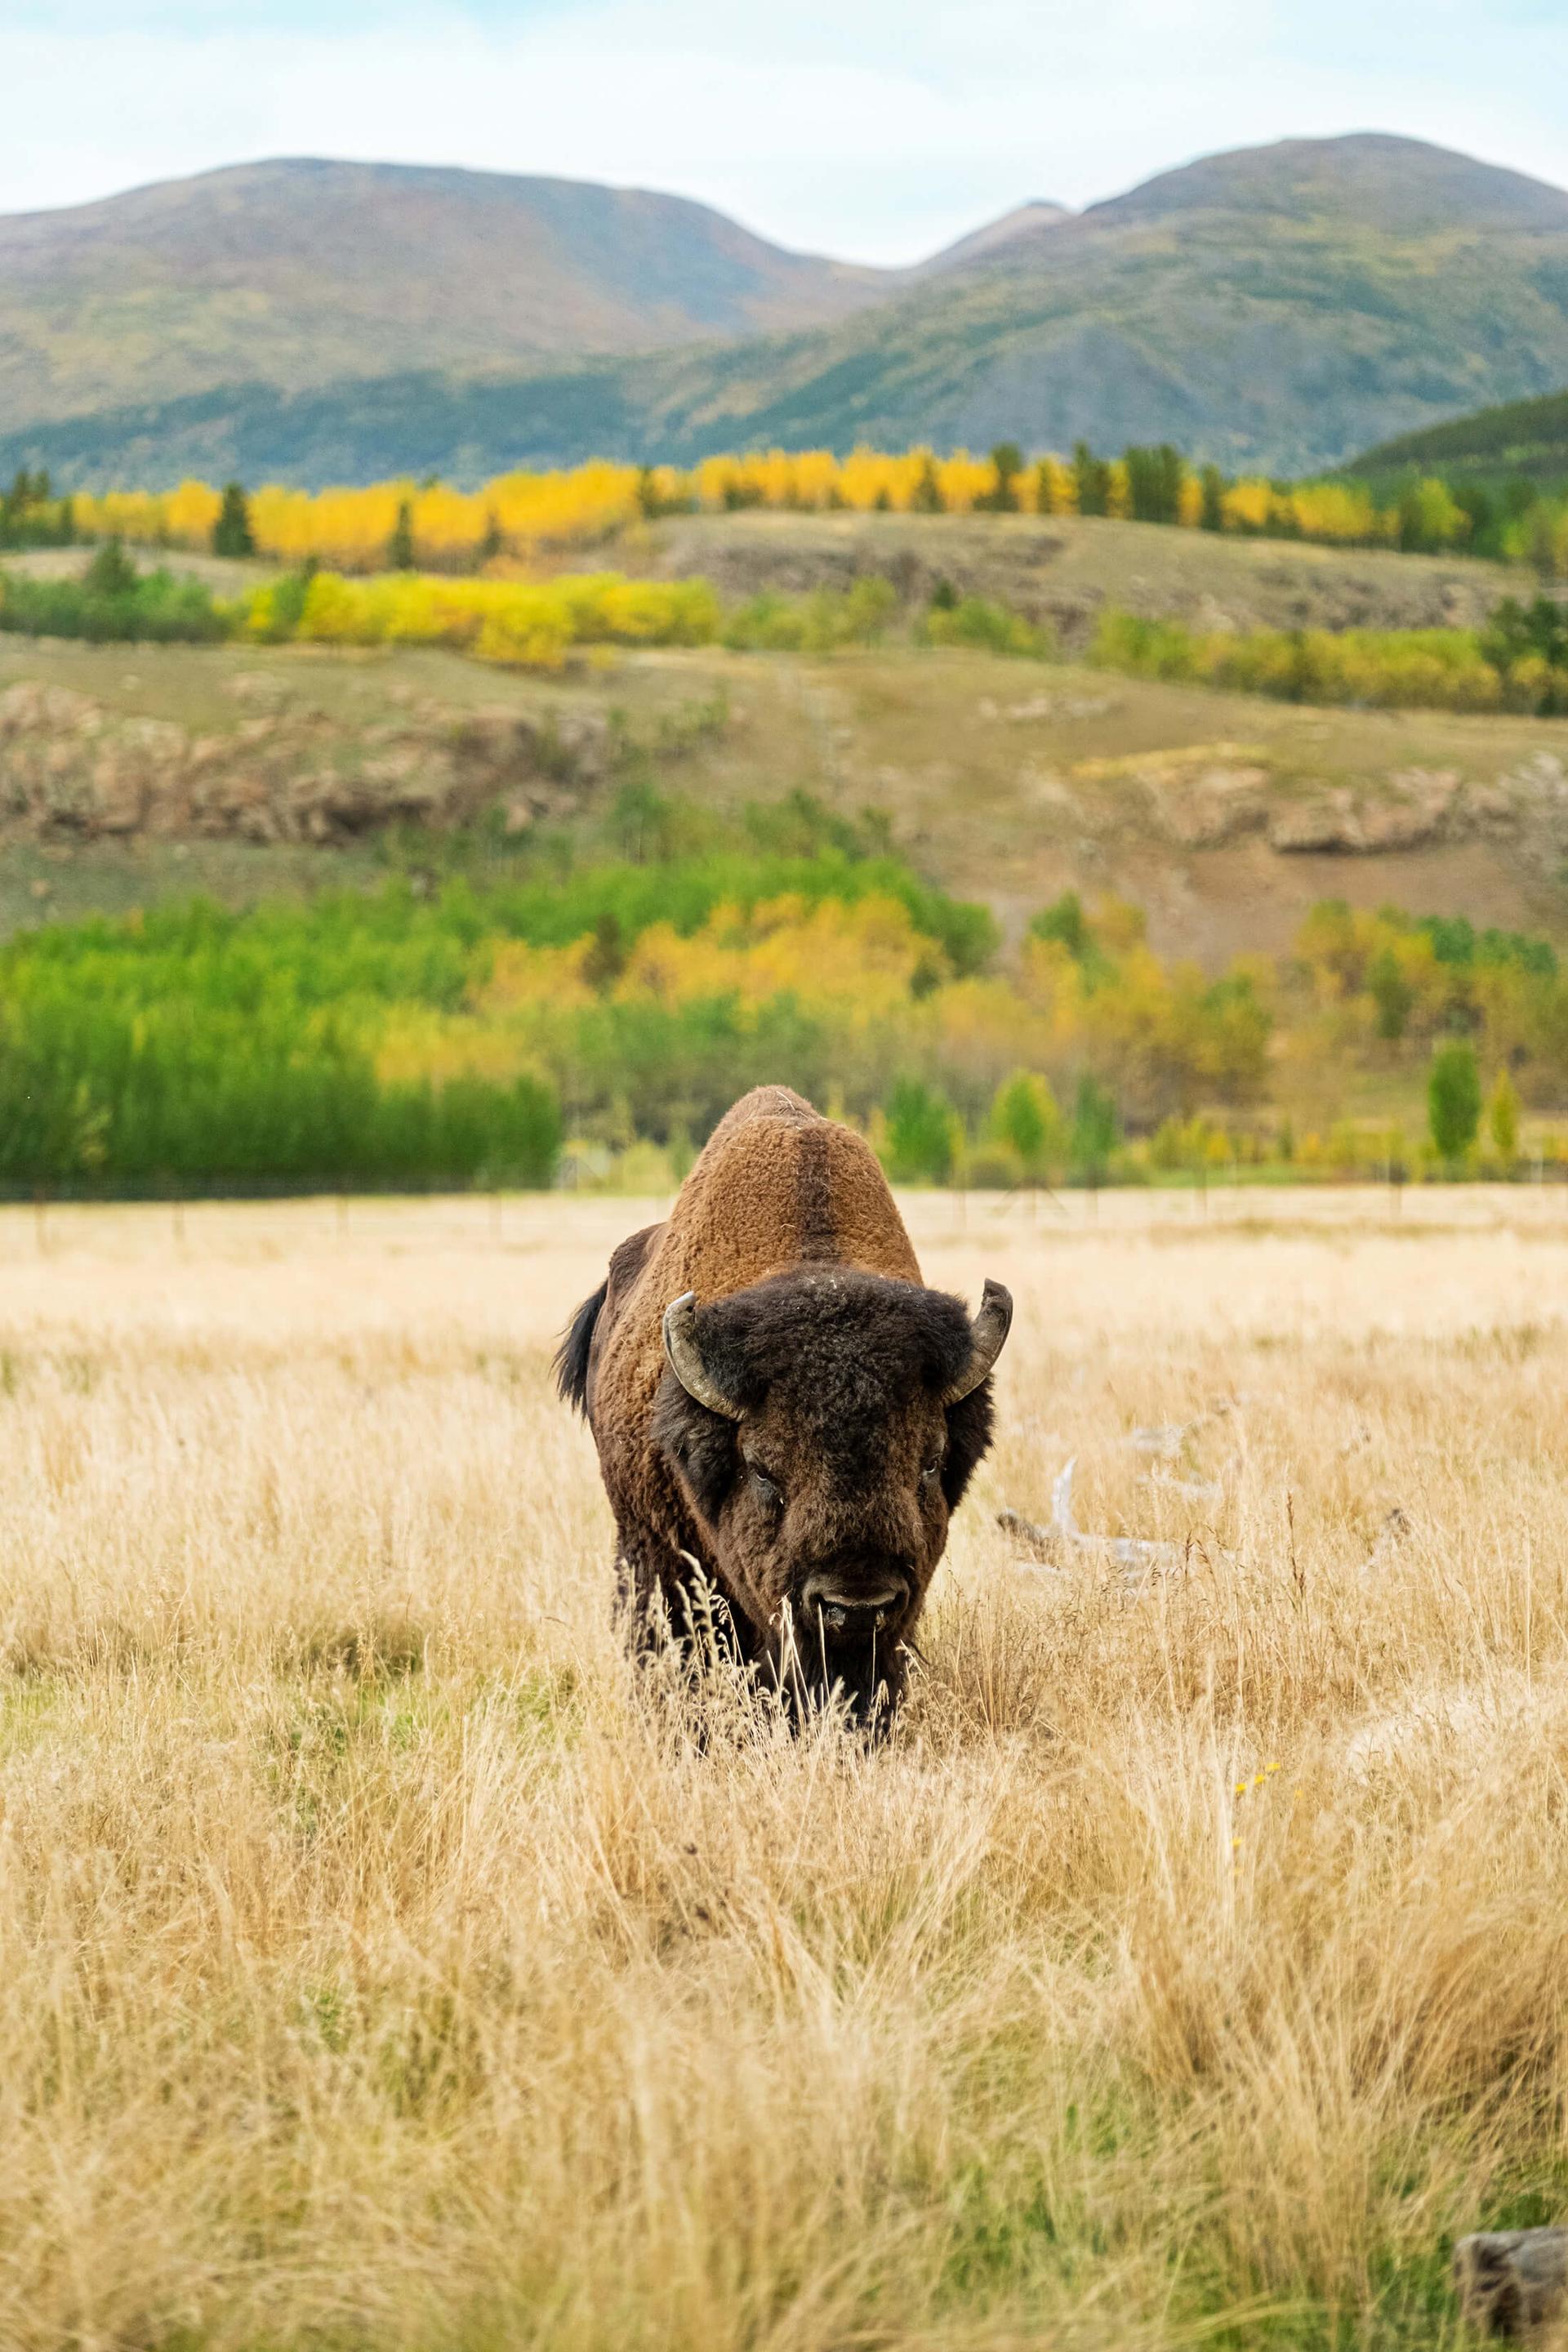 A bison in a field in the Yukon